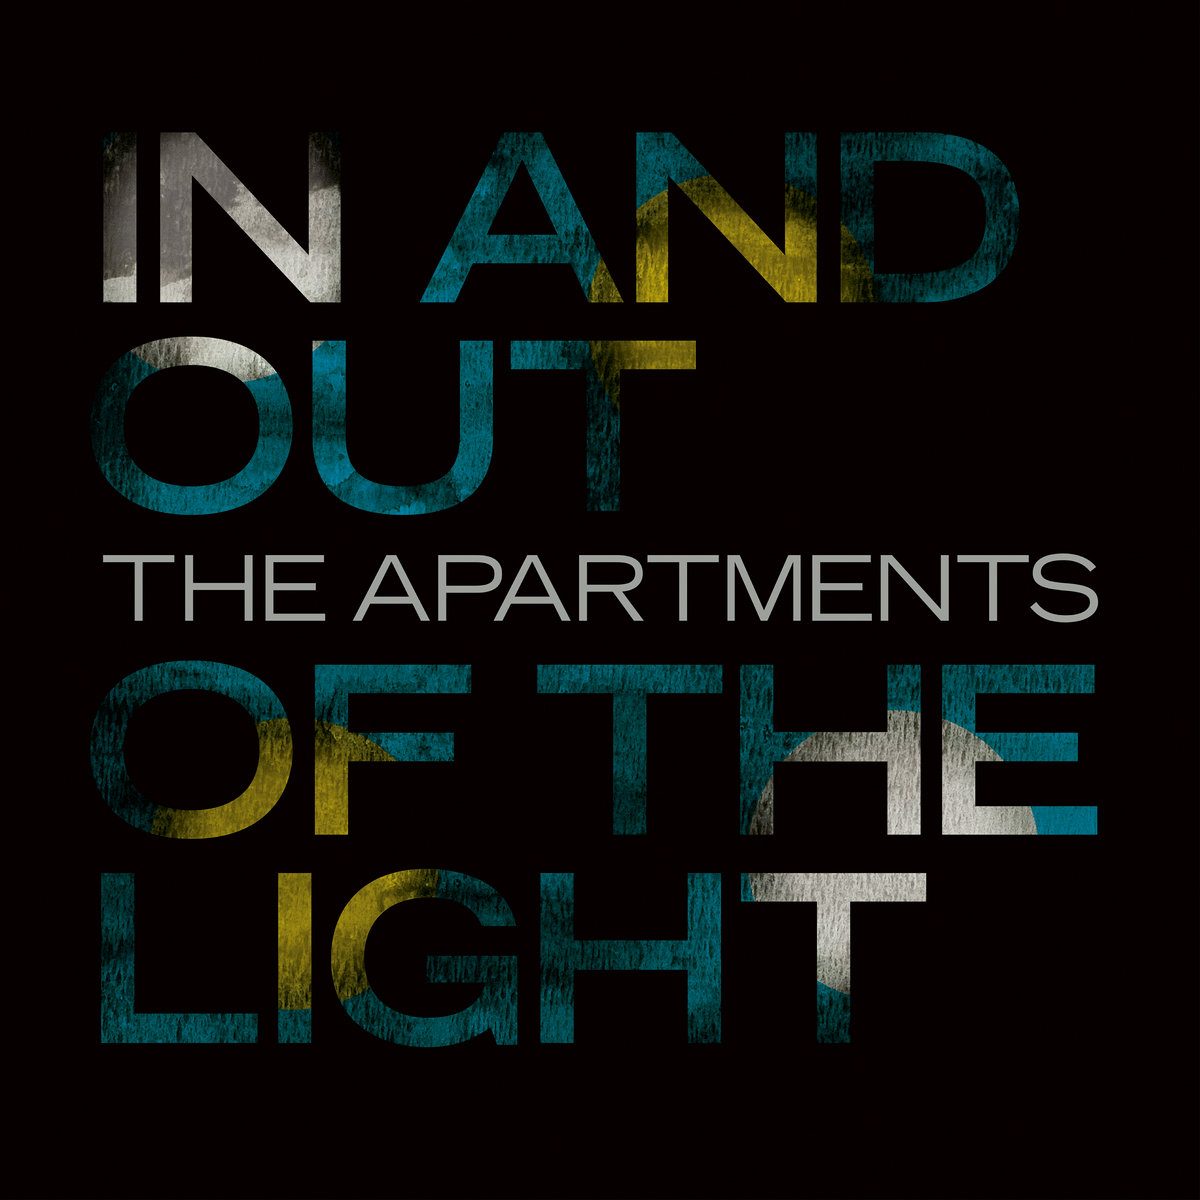 The Apartments